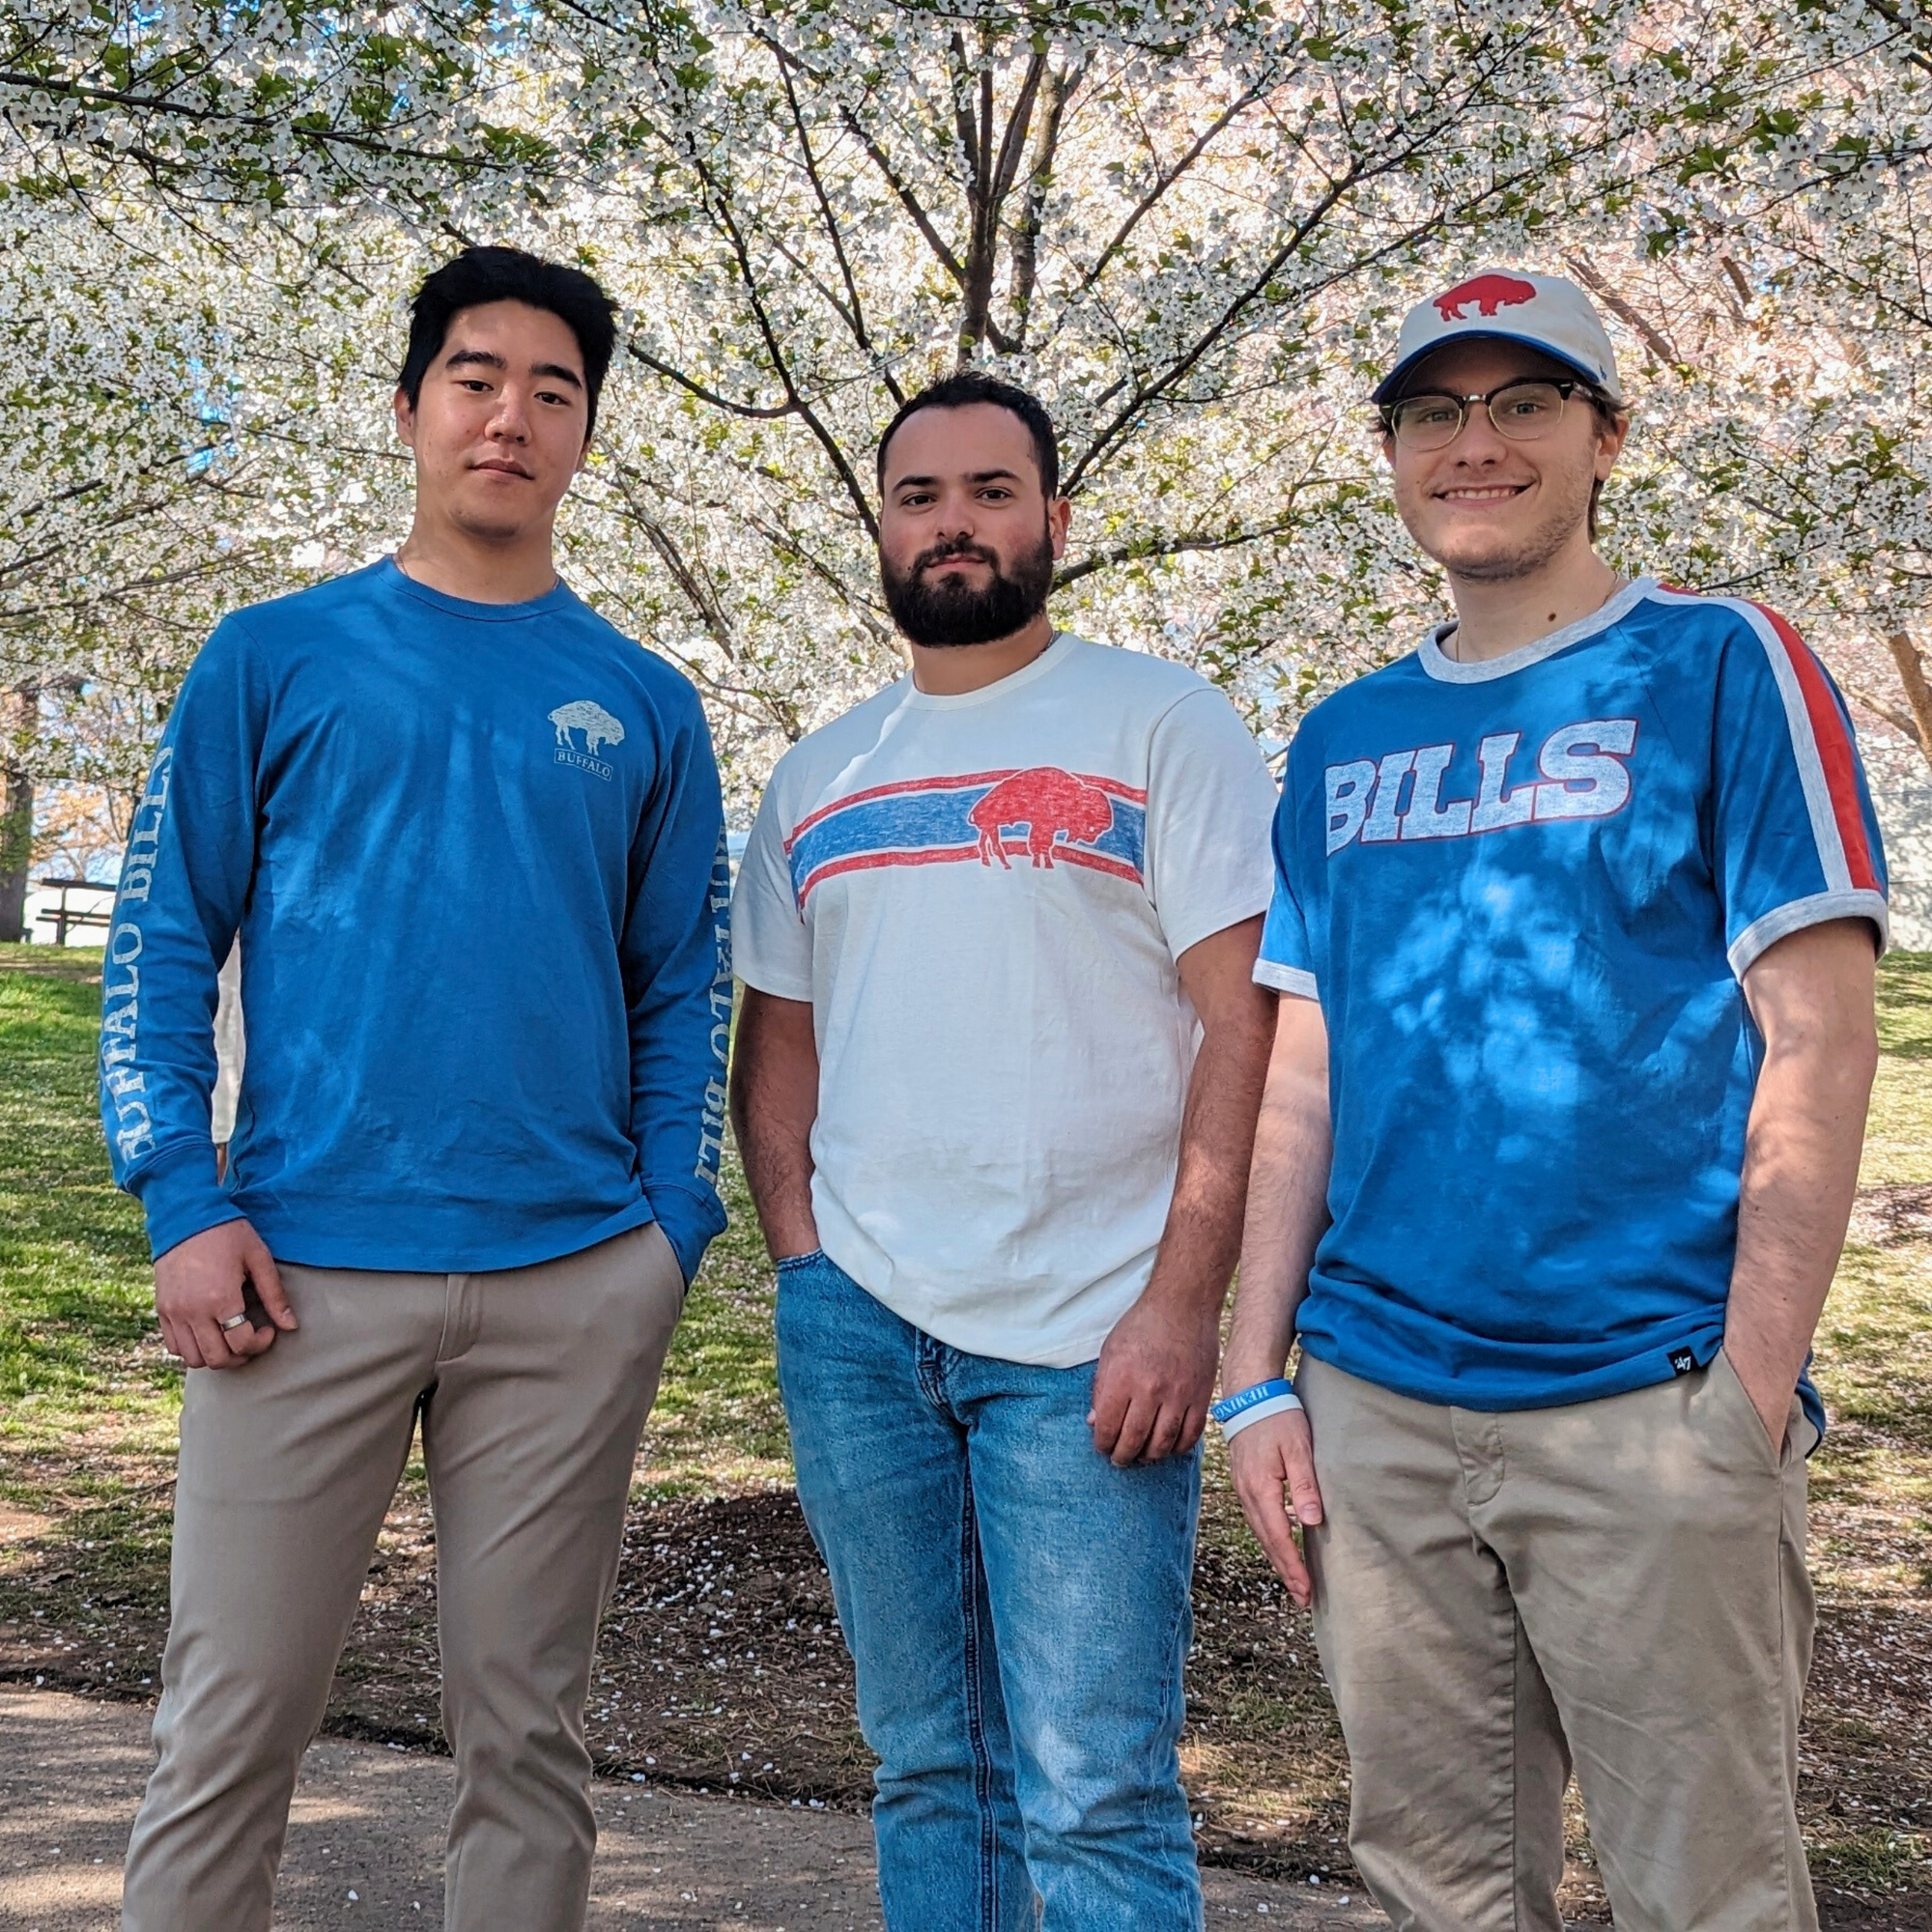 Three men posing for a photo in the park. they are all wearing buffalo bills shirts